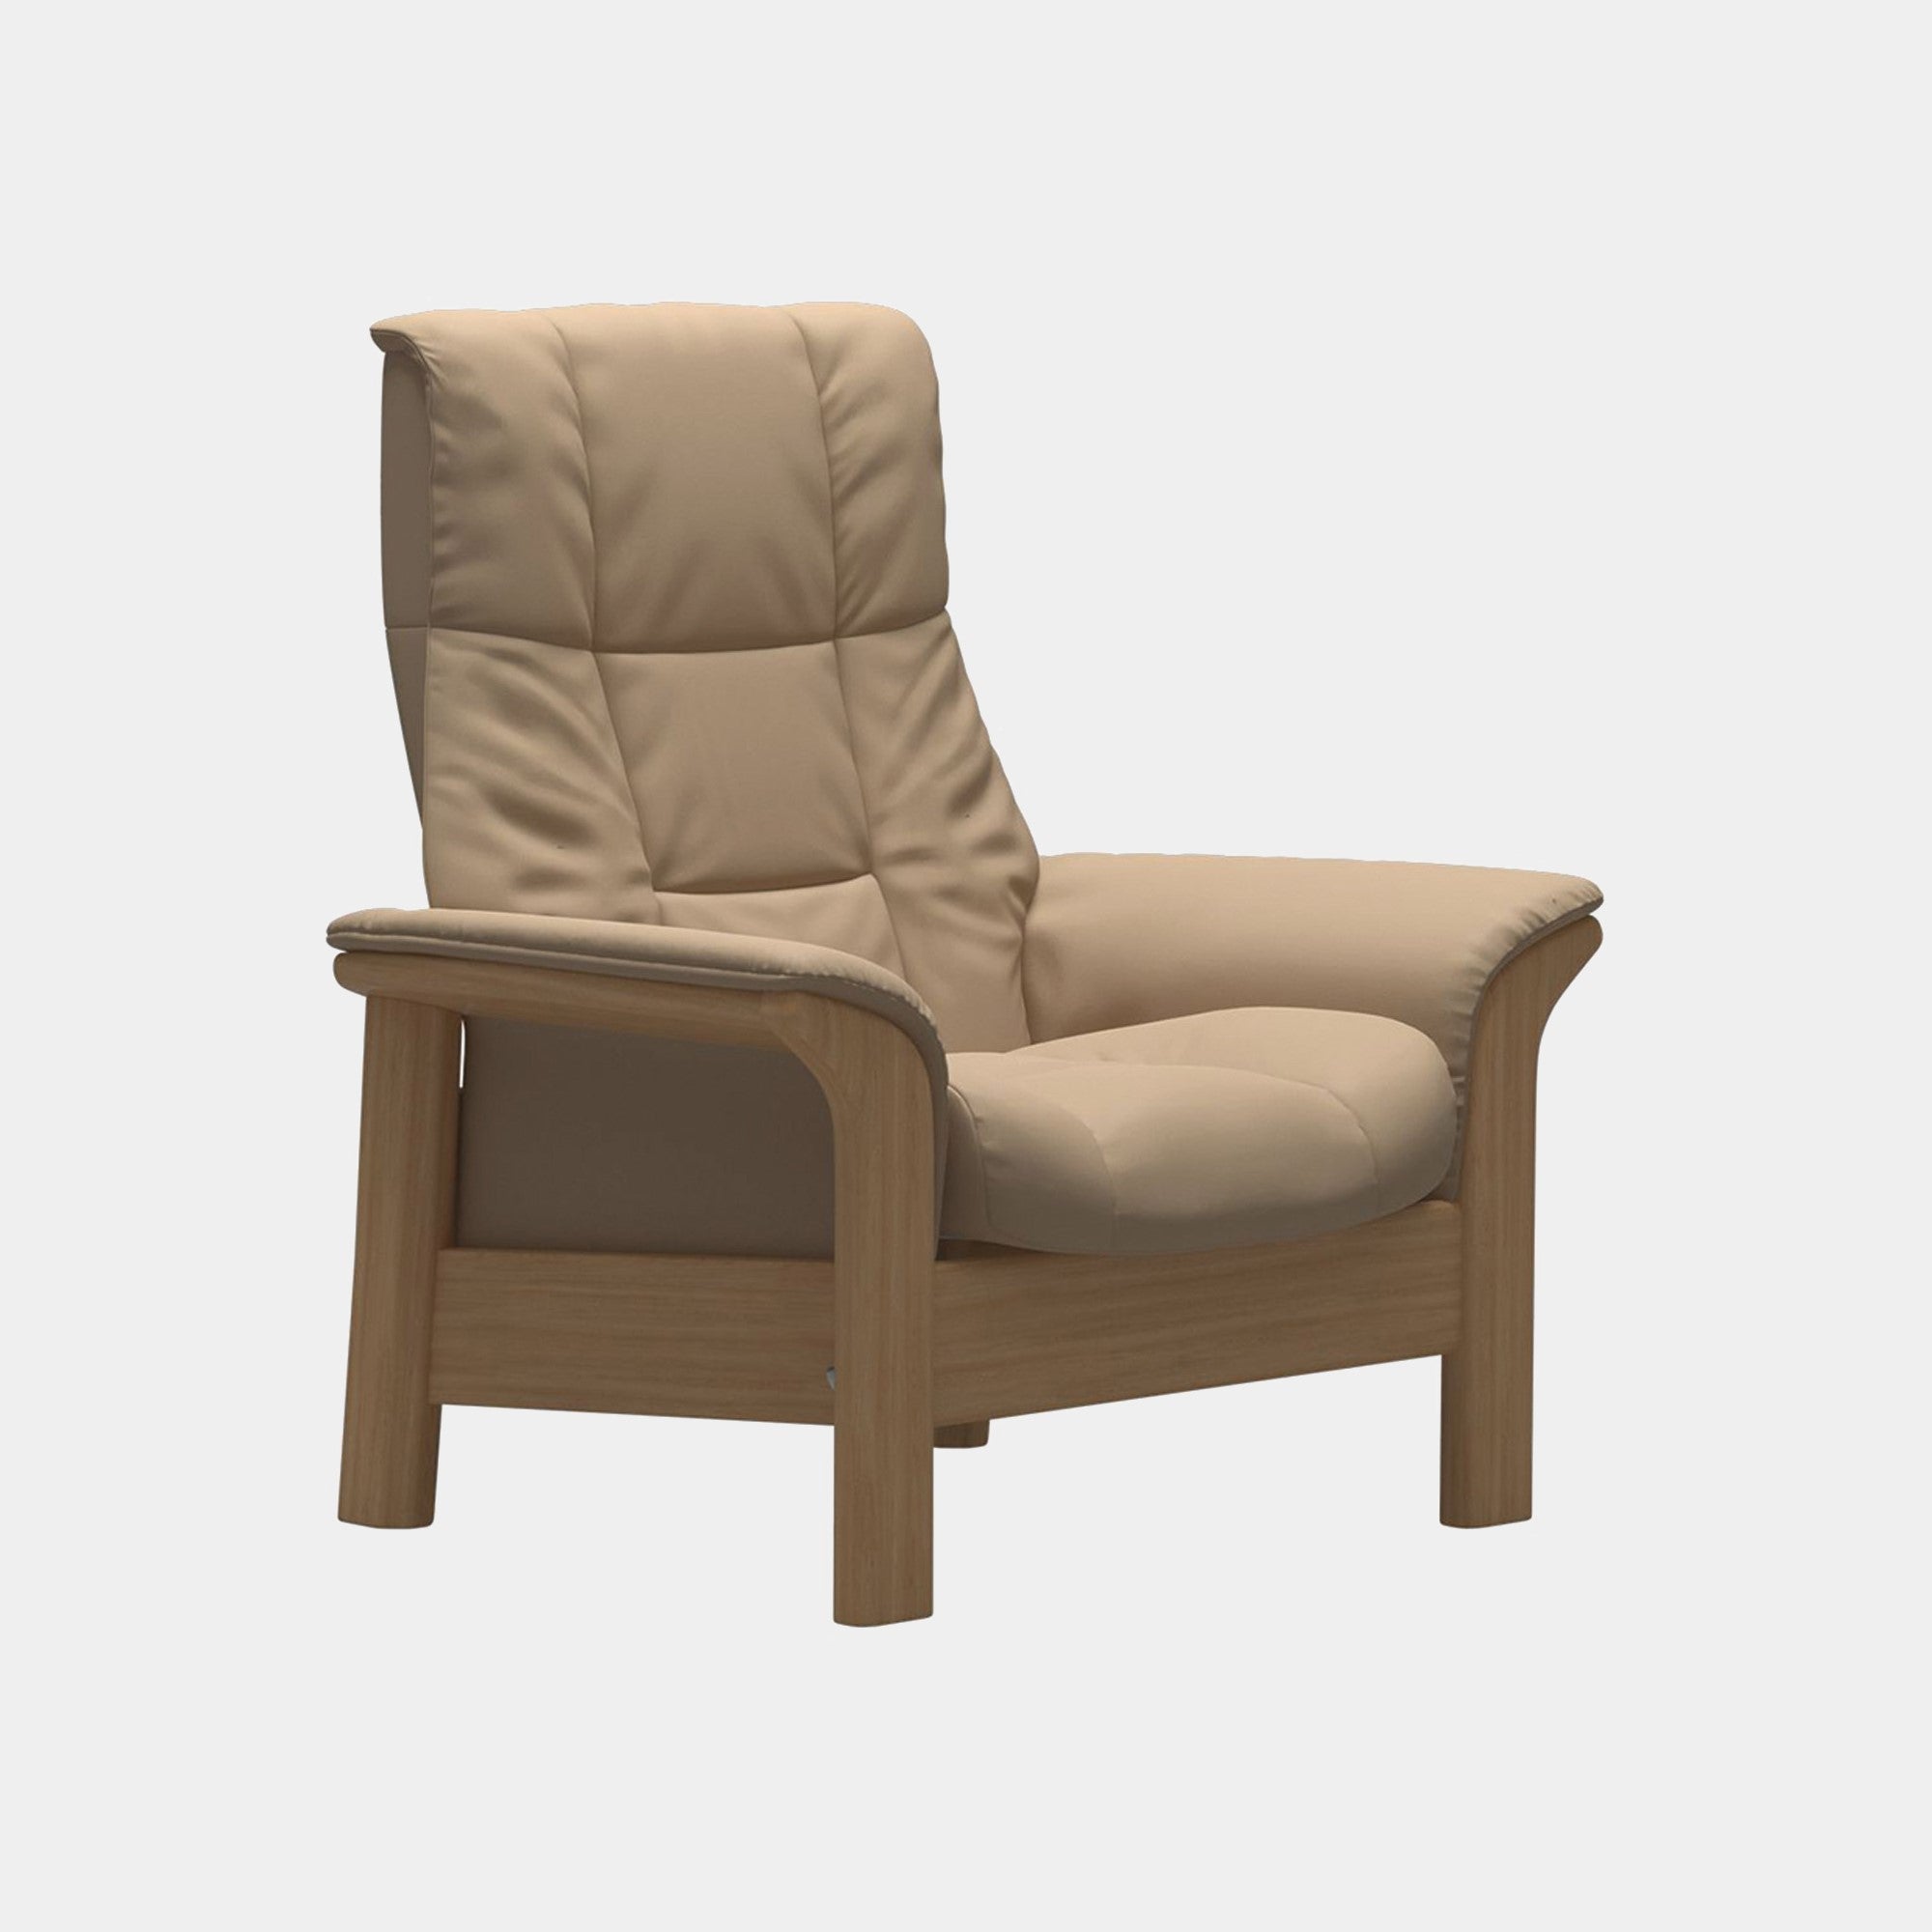 Stressless Windsor - Armchair High Back In Paloma Leather Beige With Oak Wood Base